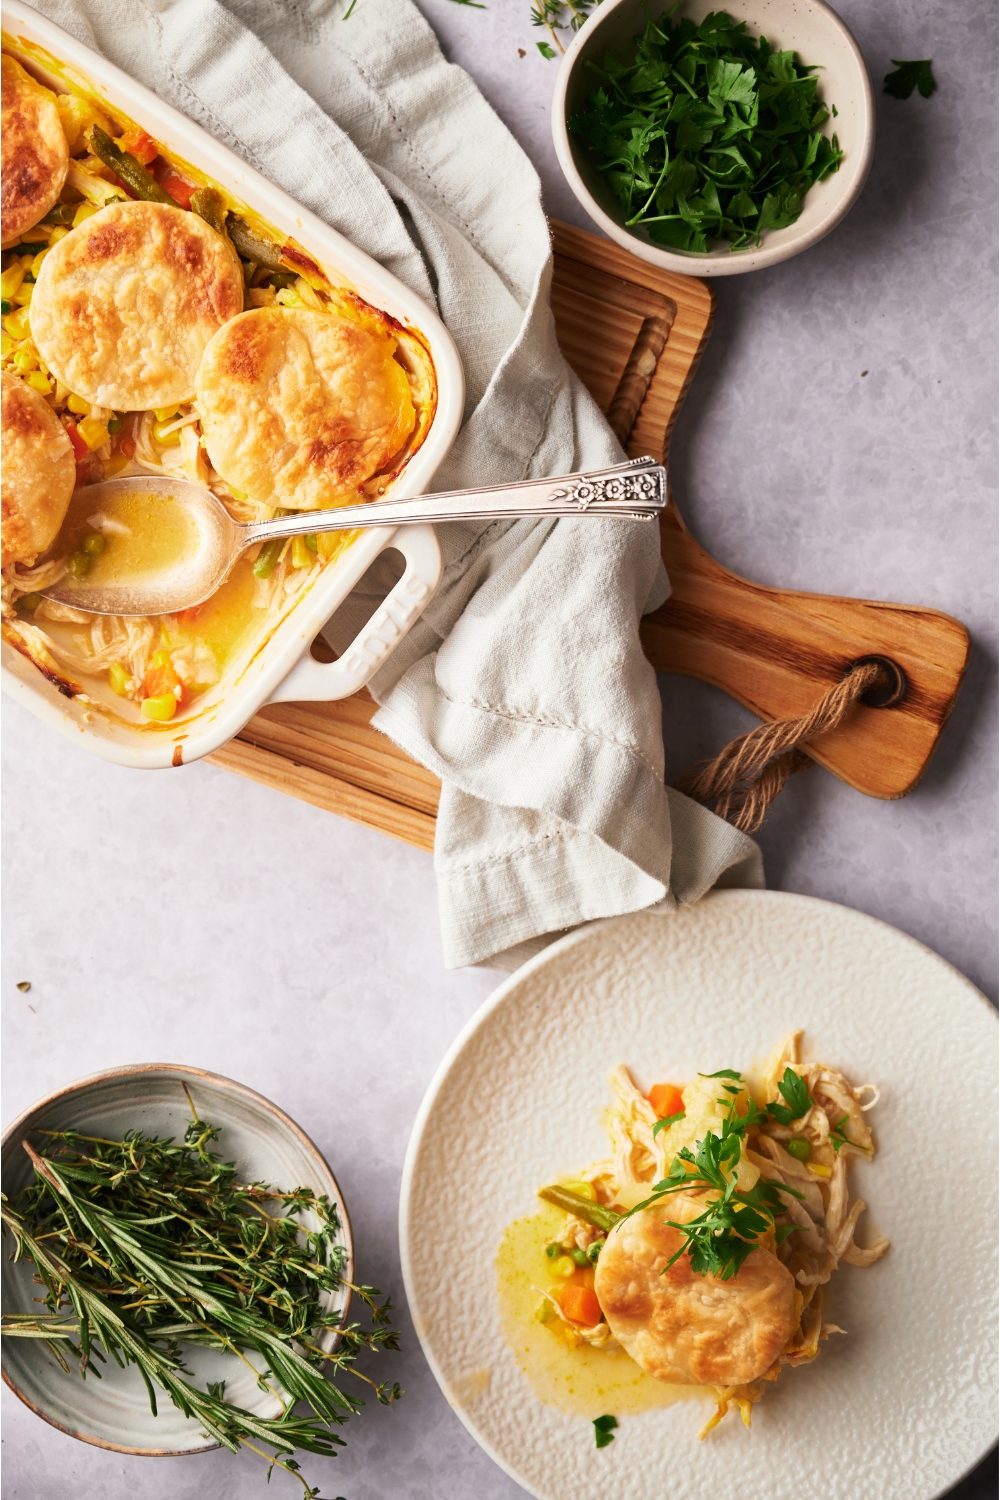 A white casserole dish with chicken pot pie casserole and a serving spoon in the dish. A serving of casserole has been portioned onto a white plate. The plate is garnished with fresh parsley. The casserole dish is on a wood board and next to it is a dish towel and bowls of fresh herbs.